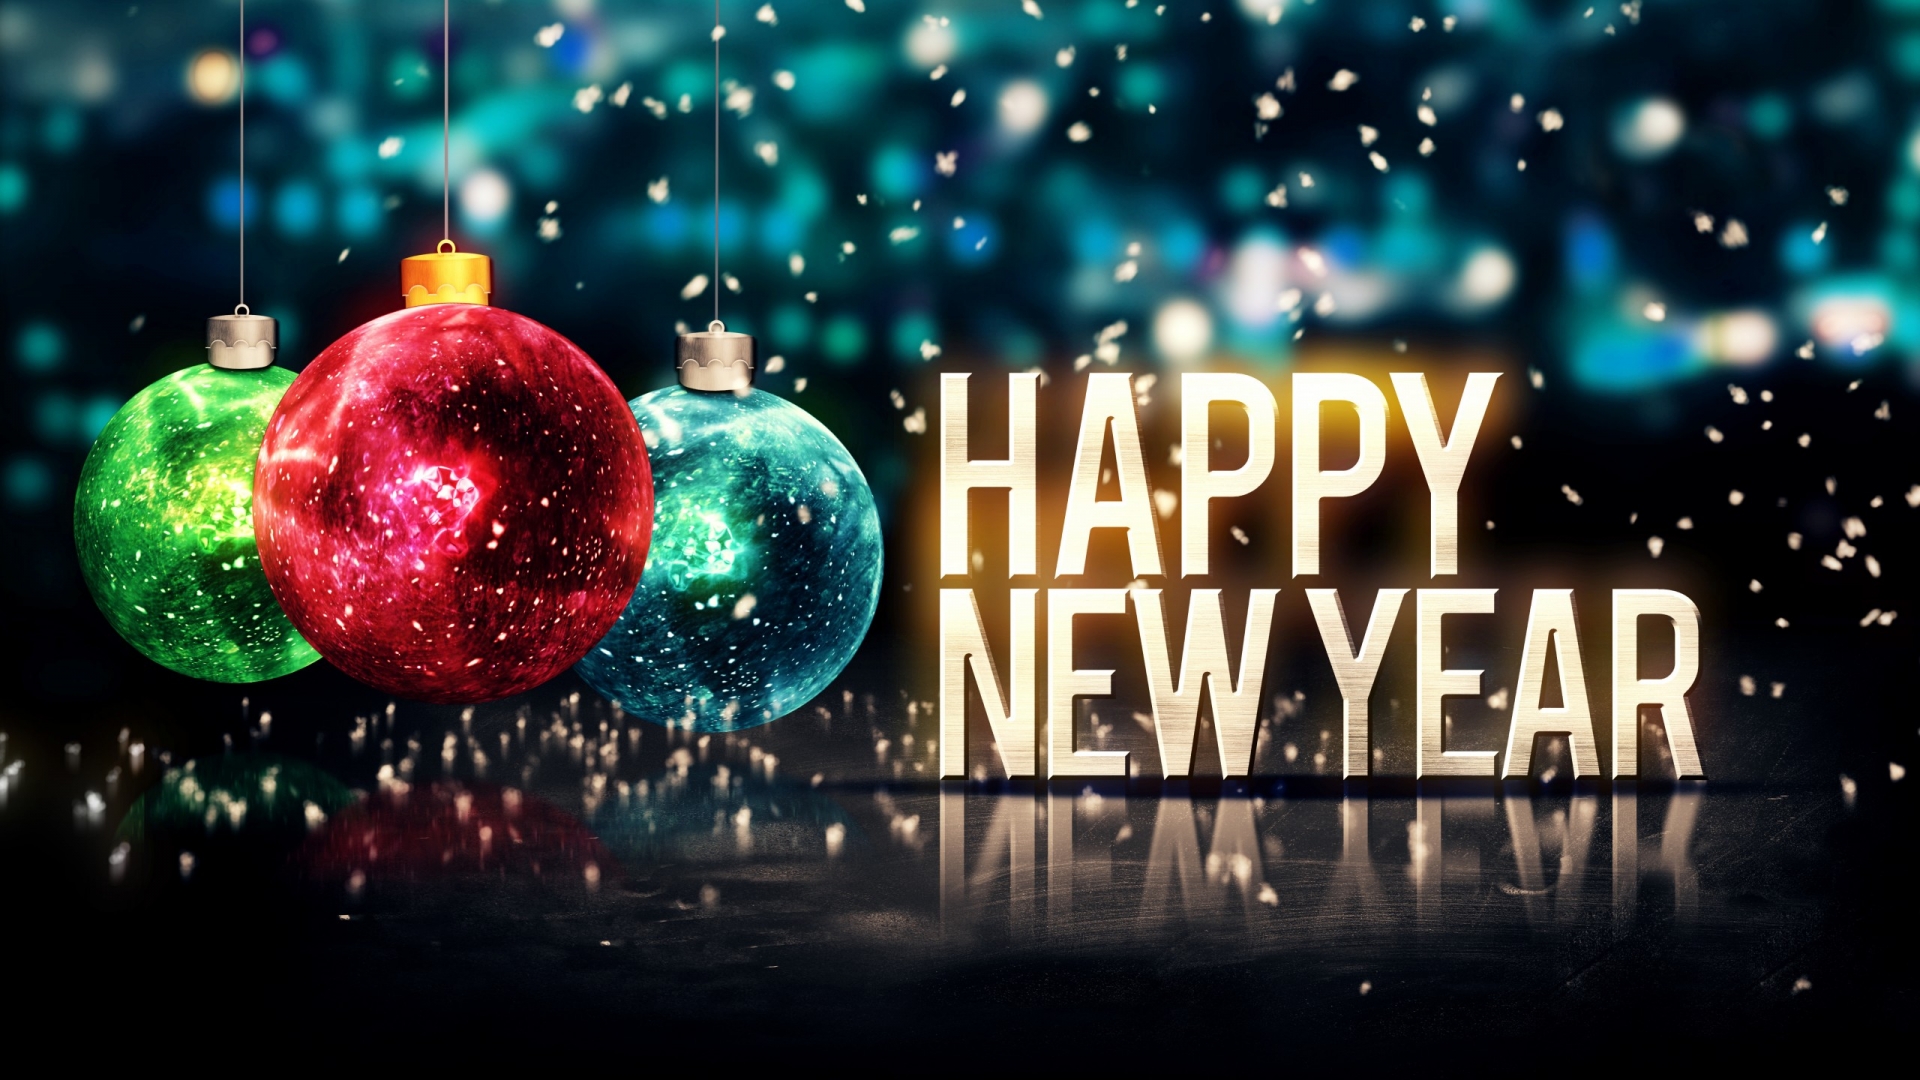 Happy New Year Ornament Hd Wallpaper 1080p Free Download